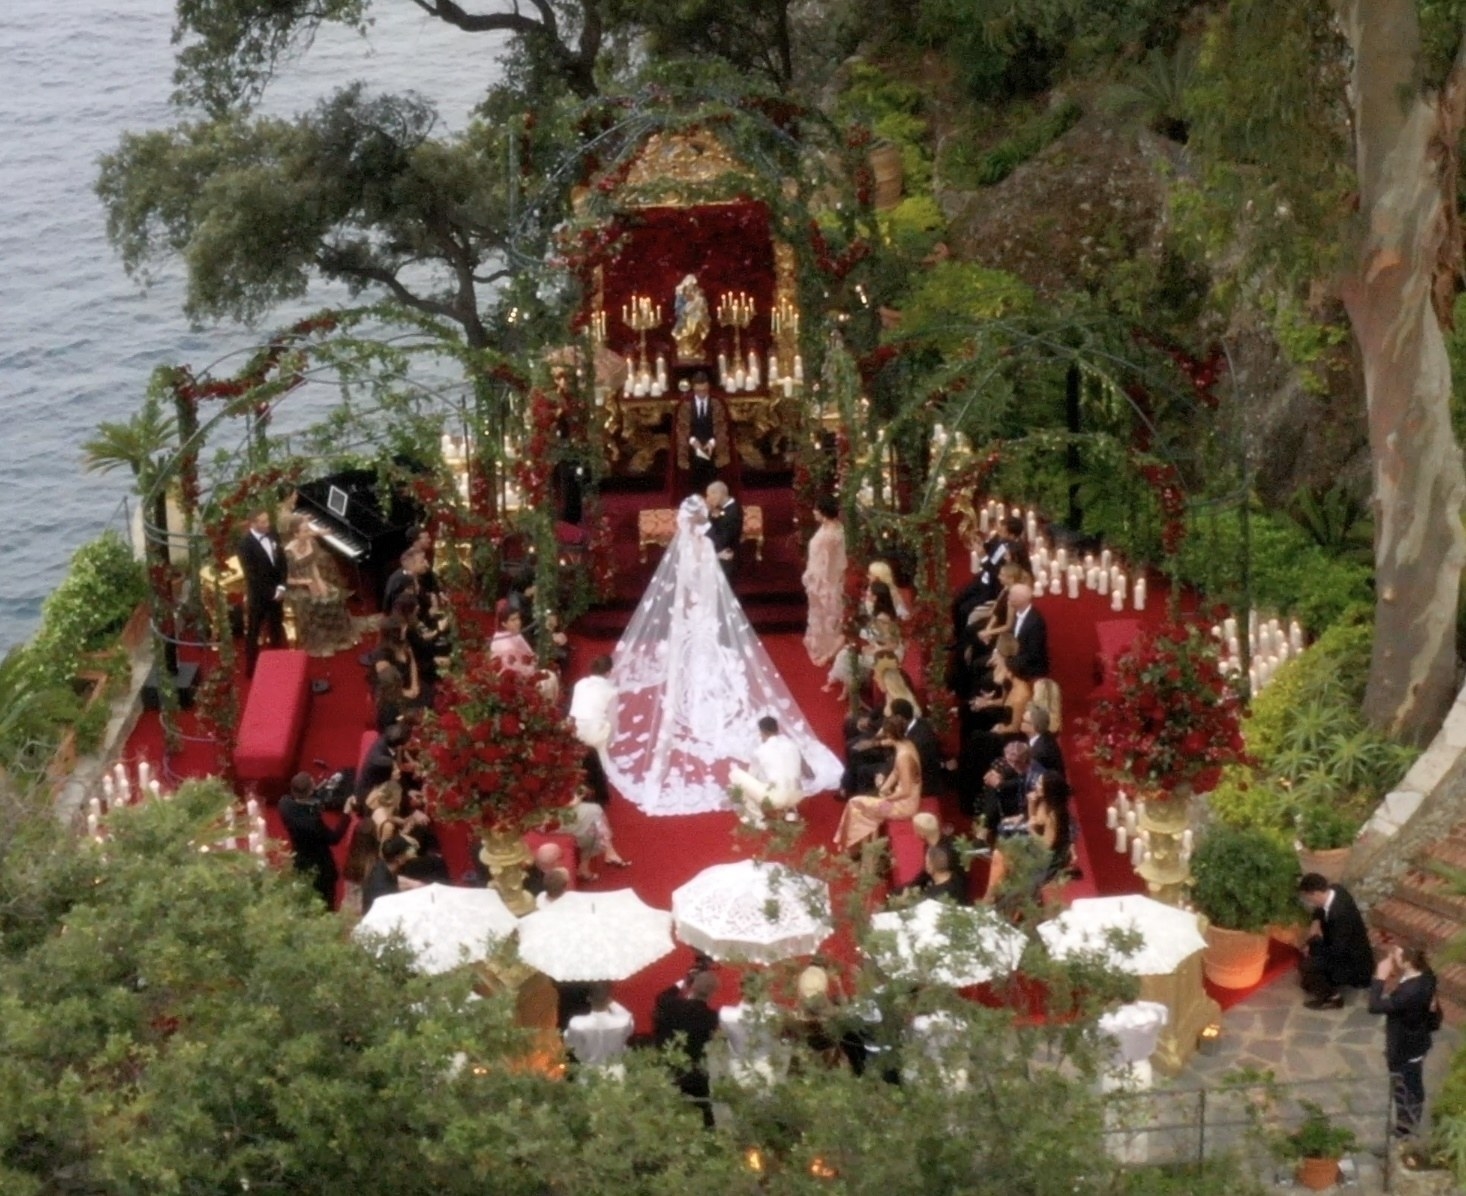 An aerial shot of the ceremony, which is a heavily wooded area overlooking the water